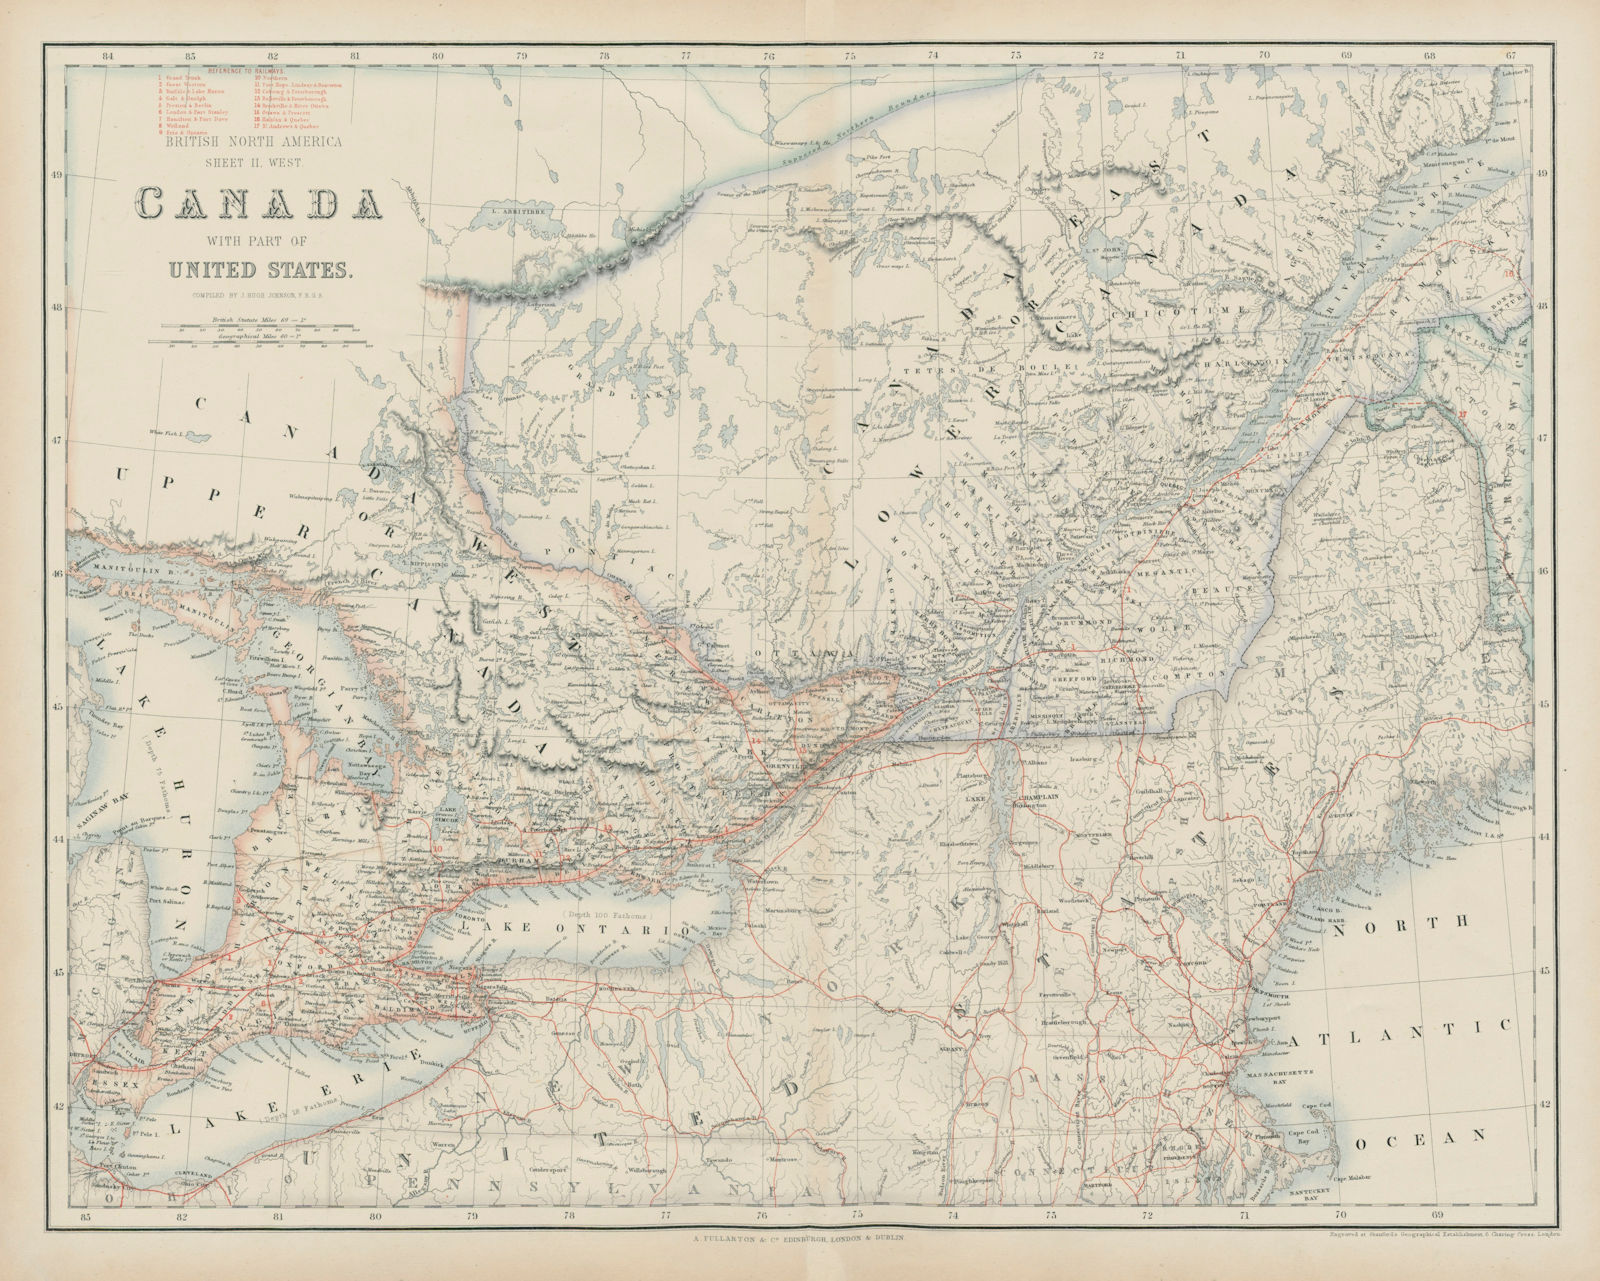 Canada with part of United States. West. Ontario & Quebec. SWANSTON 1860 map